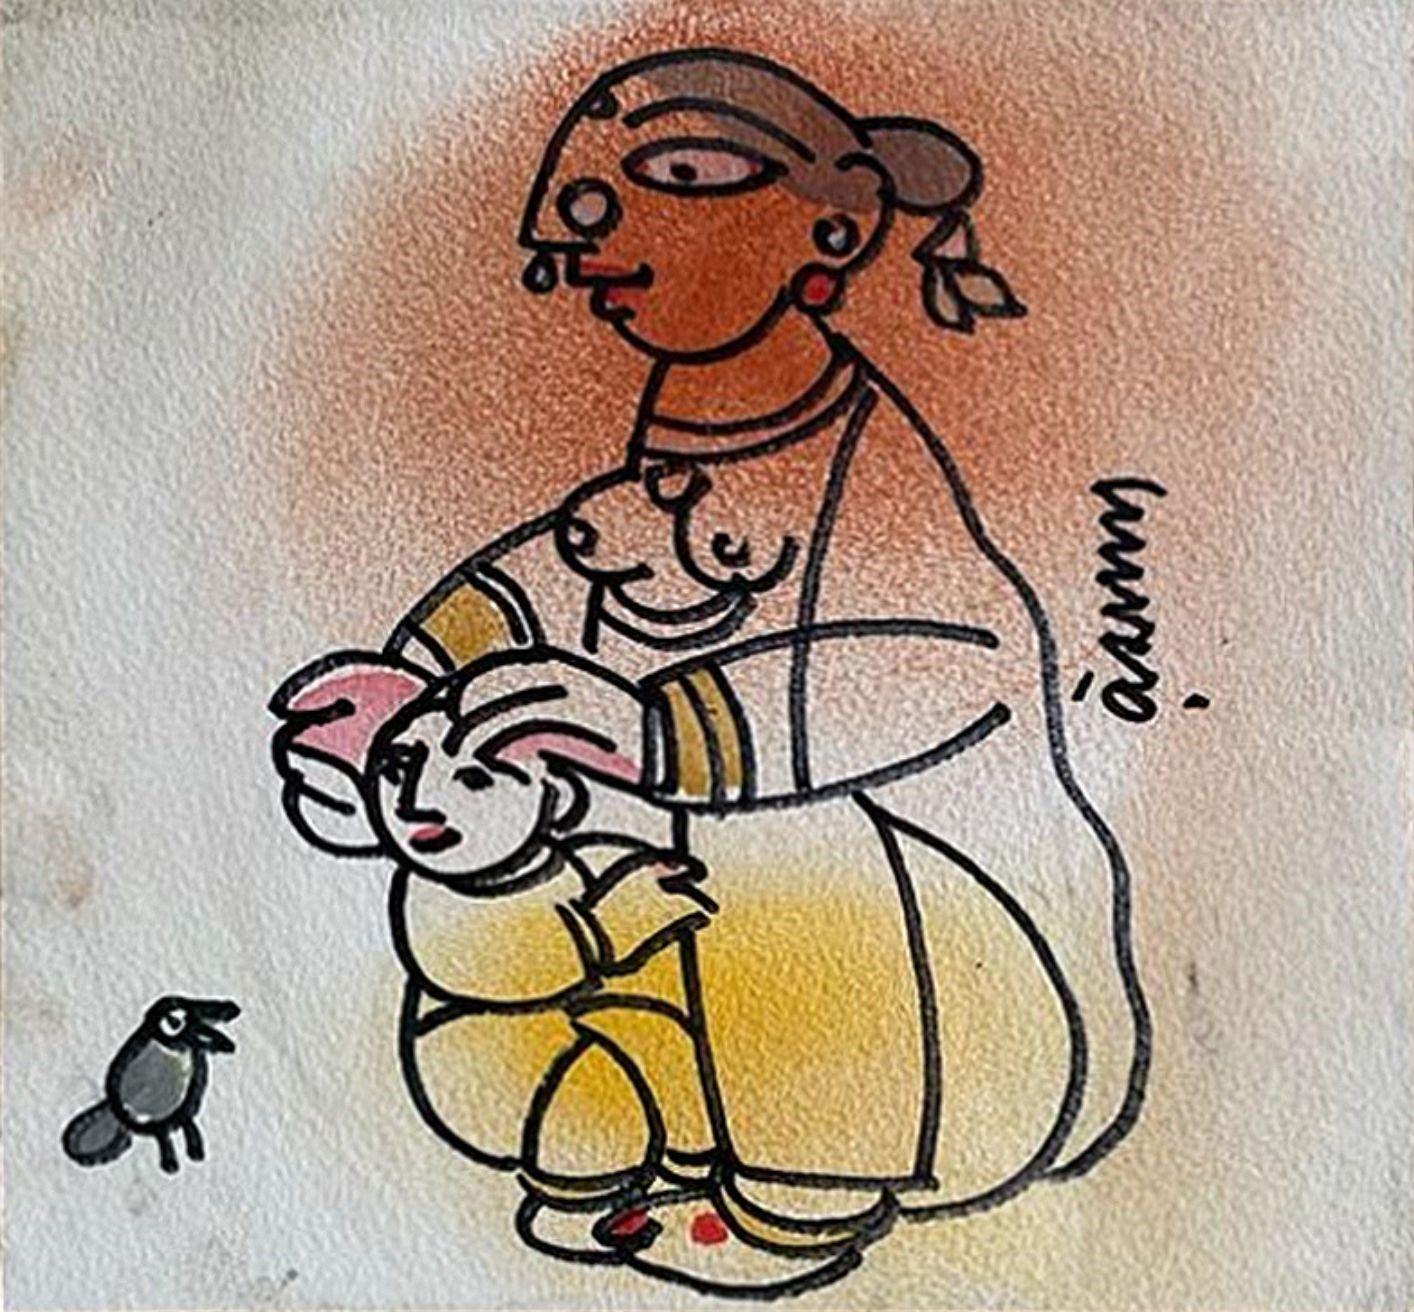 Mother & Child, Mixed Media on Paper, by Modern Indian Artist "In Stock" - Mixed Media Art by Ramananda Bandopadhayay